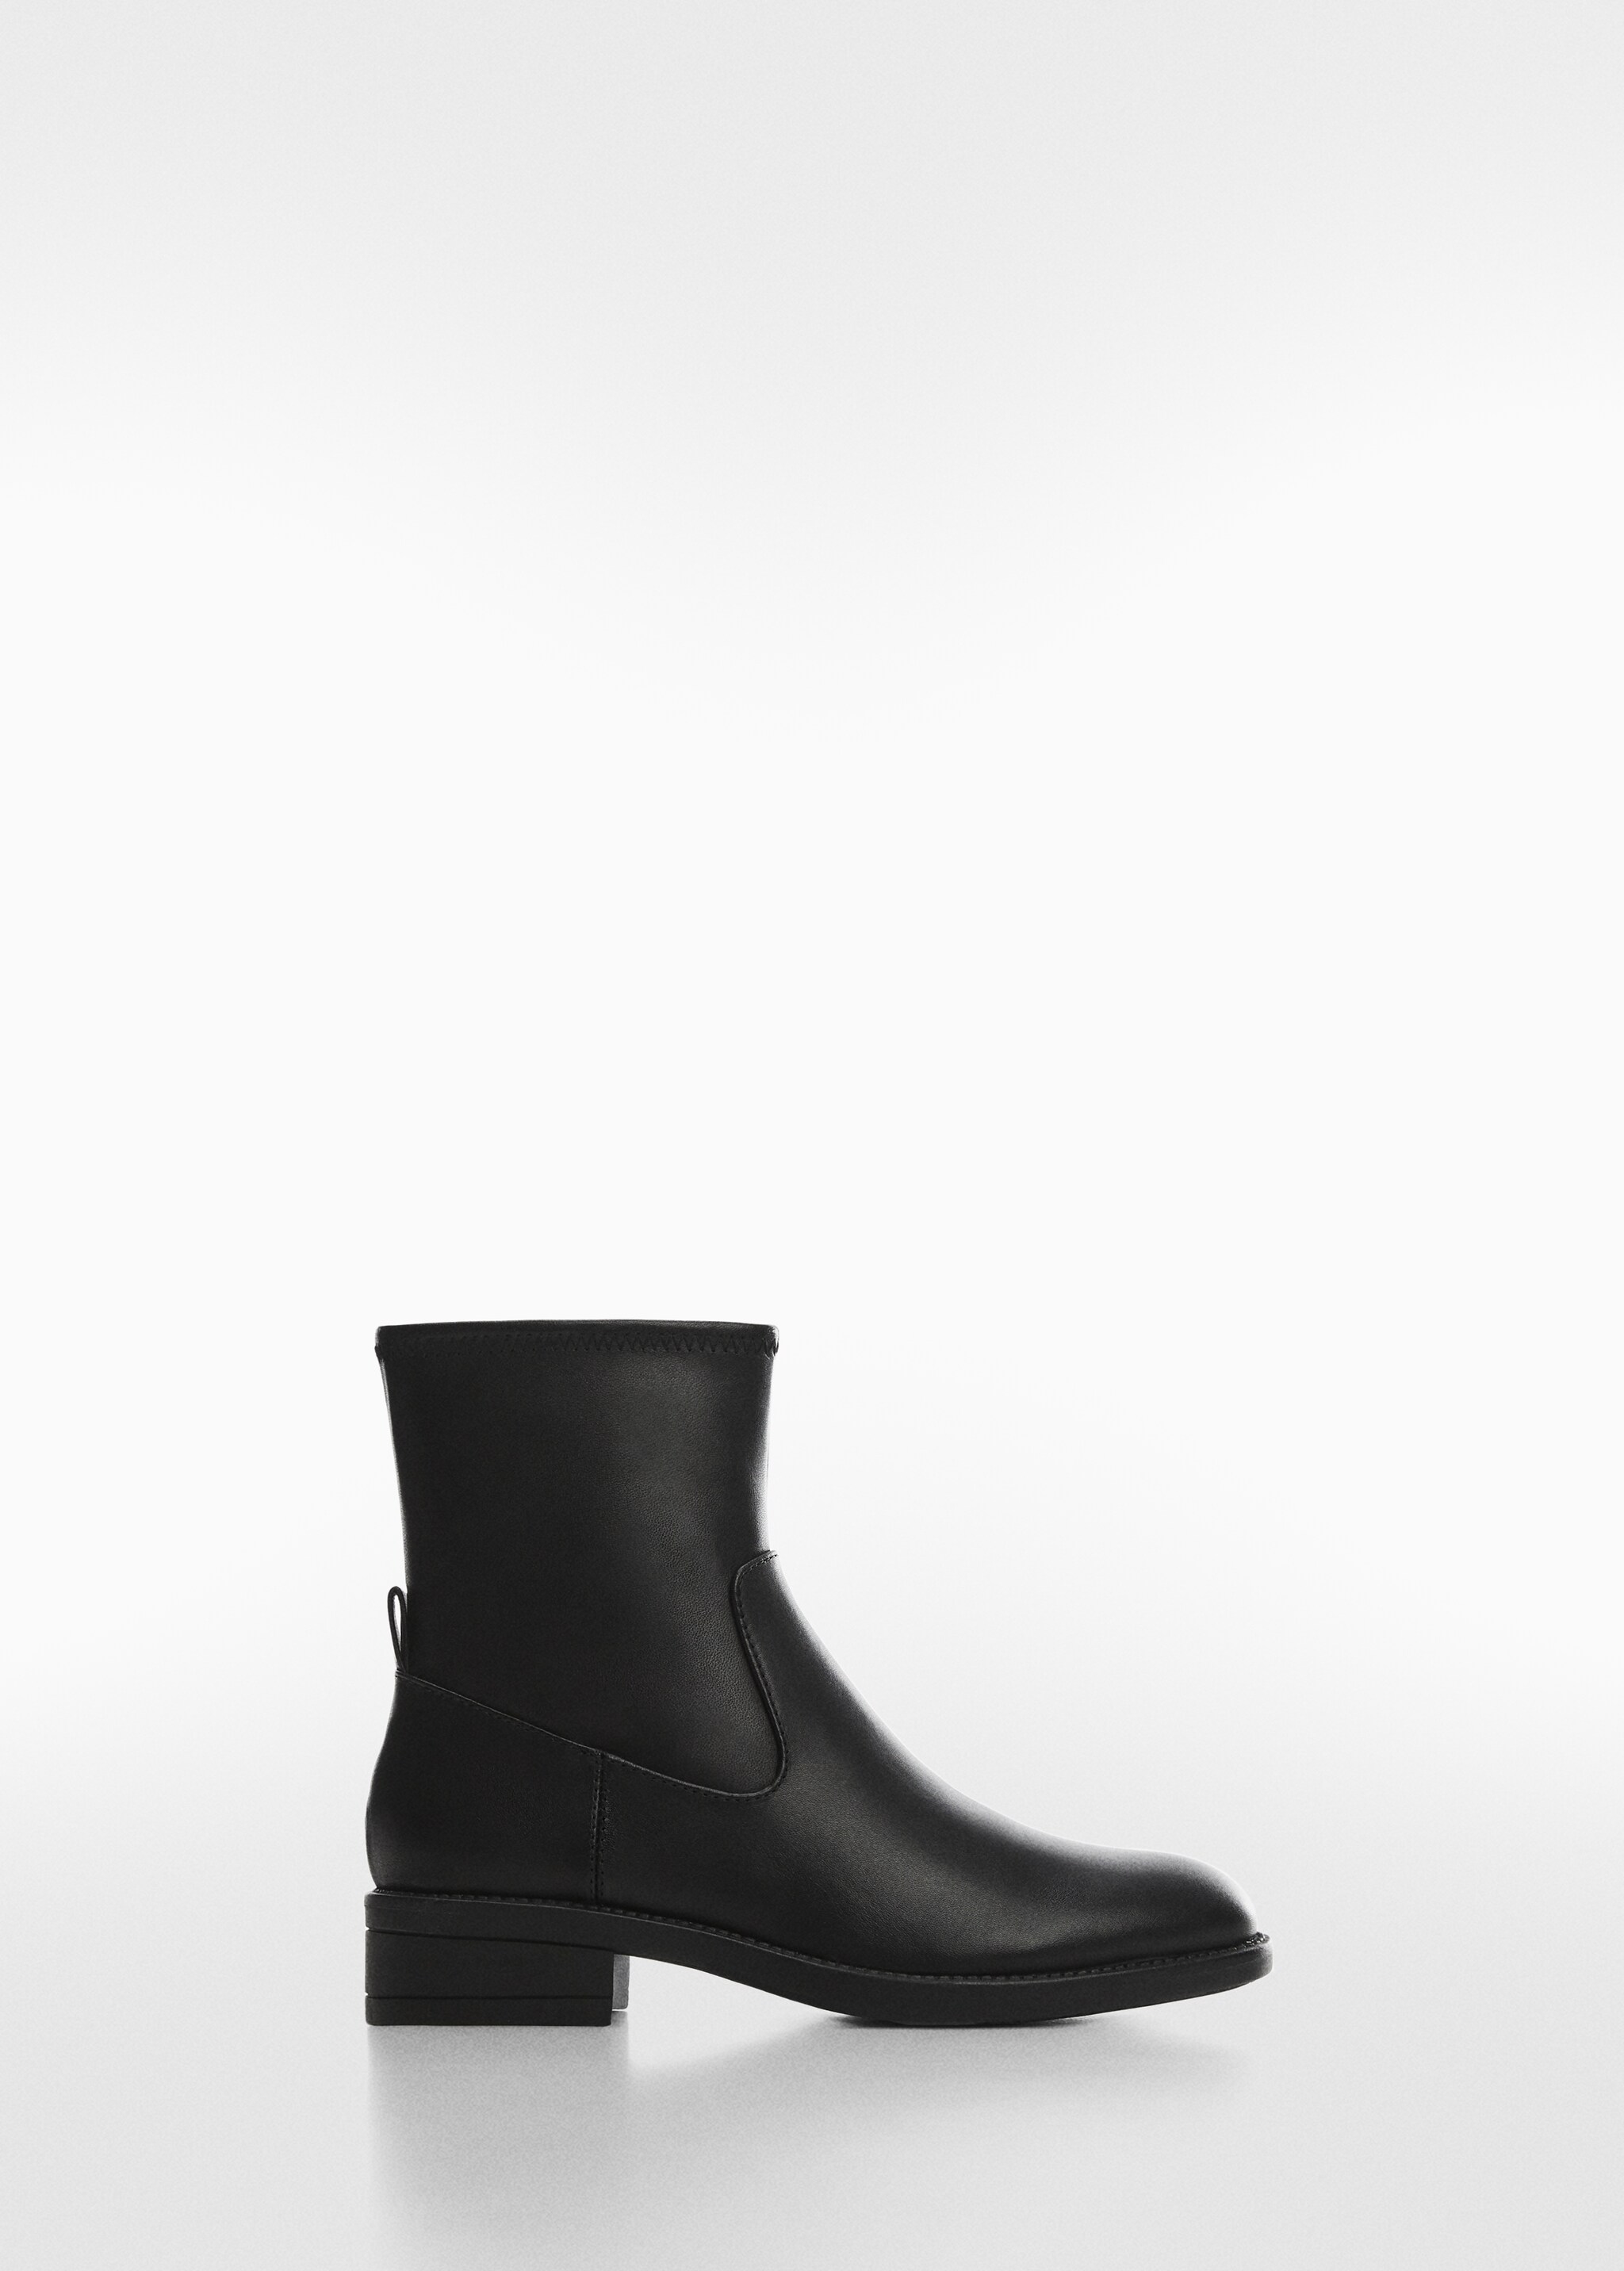 Flat leather ankle boots - Article without model